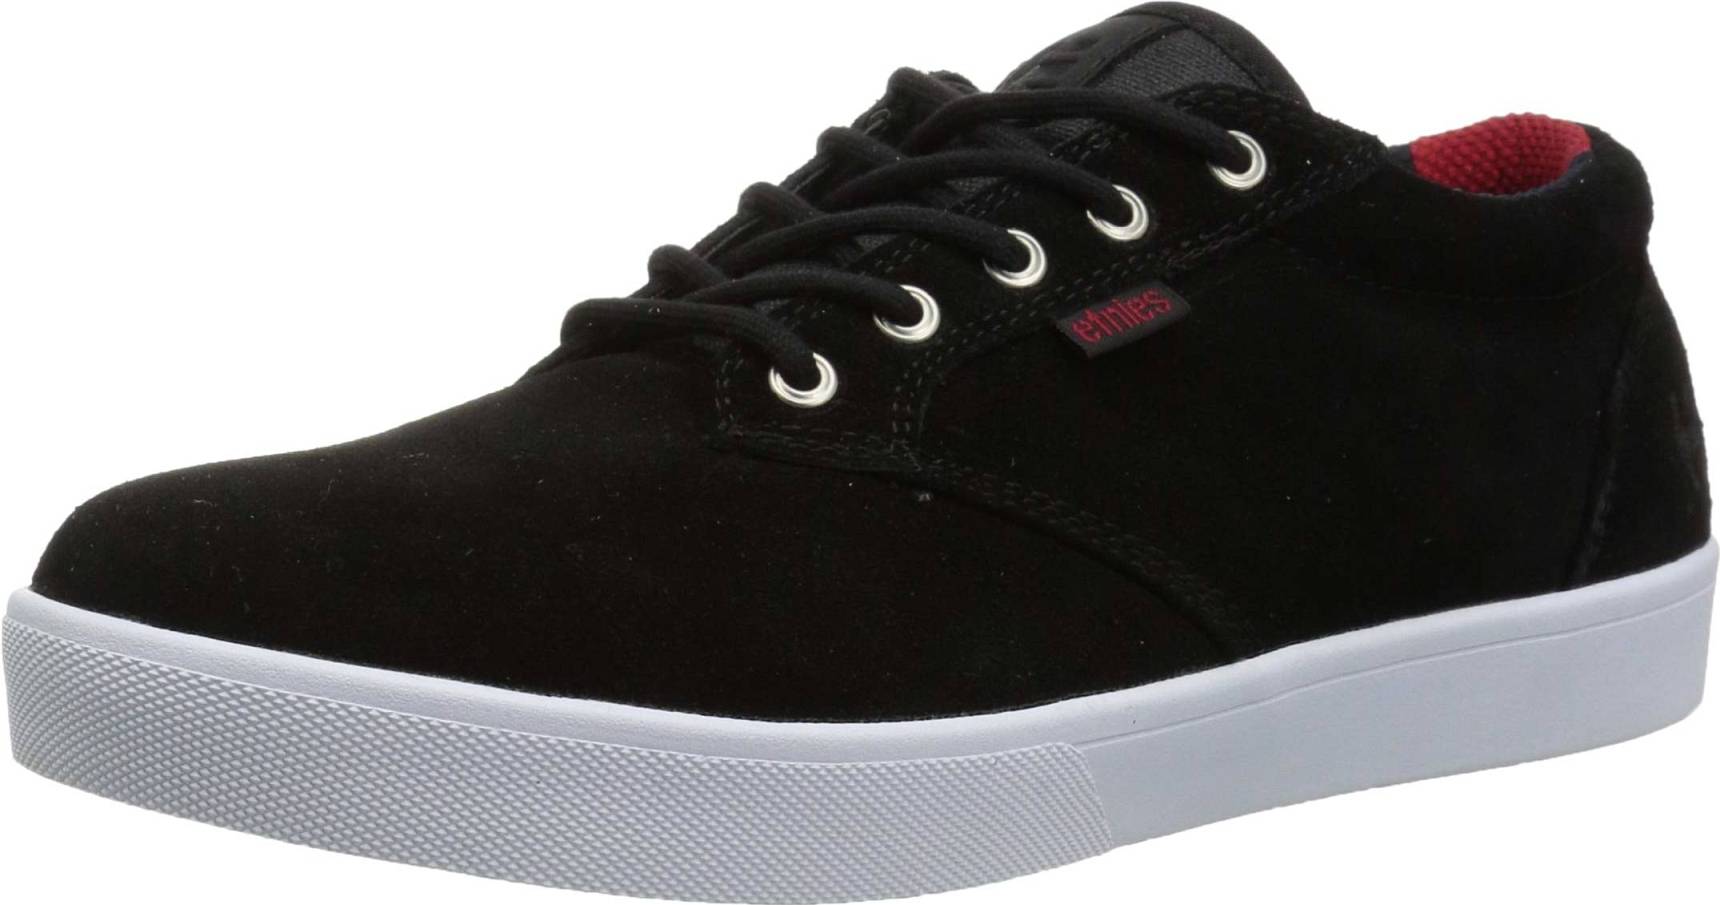 Etnies Jameson Mid Crank – Shoes Reviews & Reasons To Buy